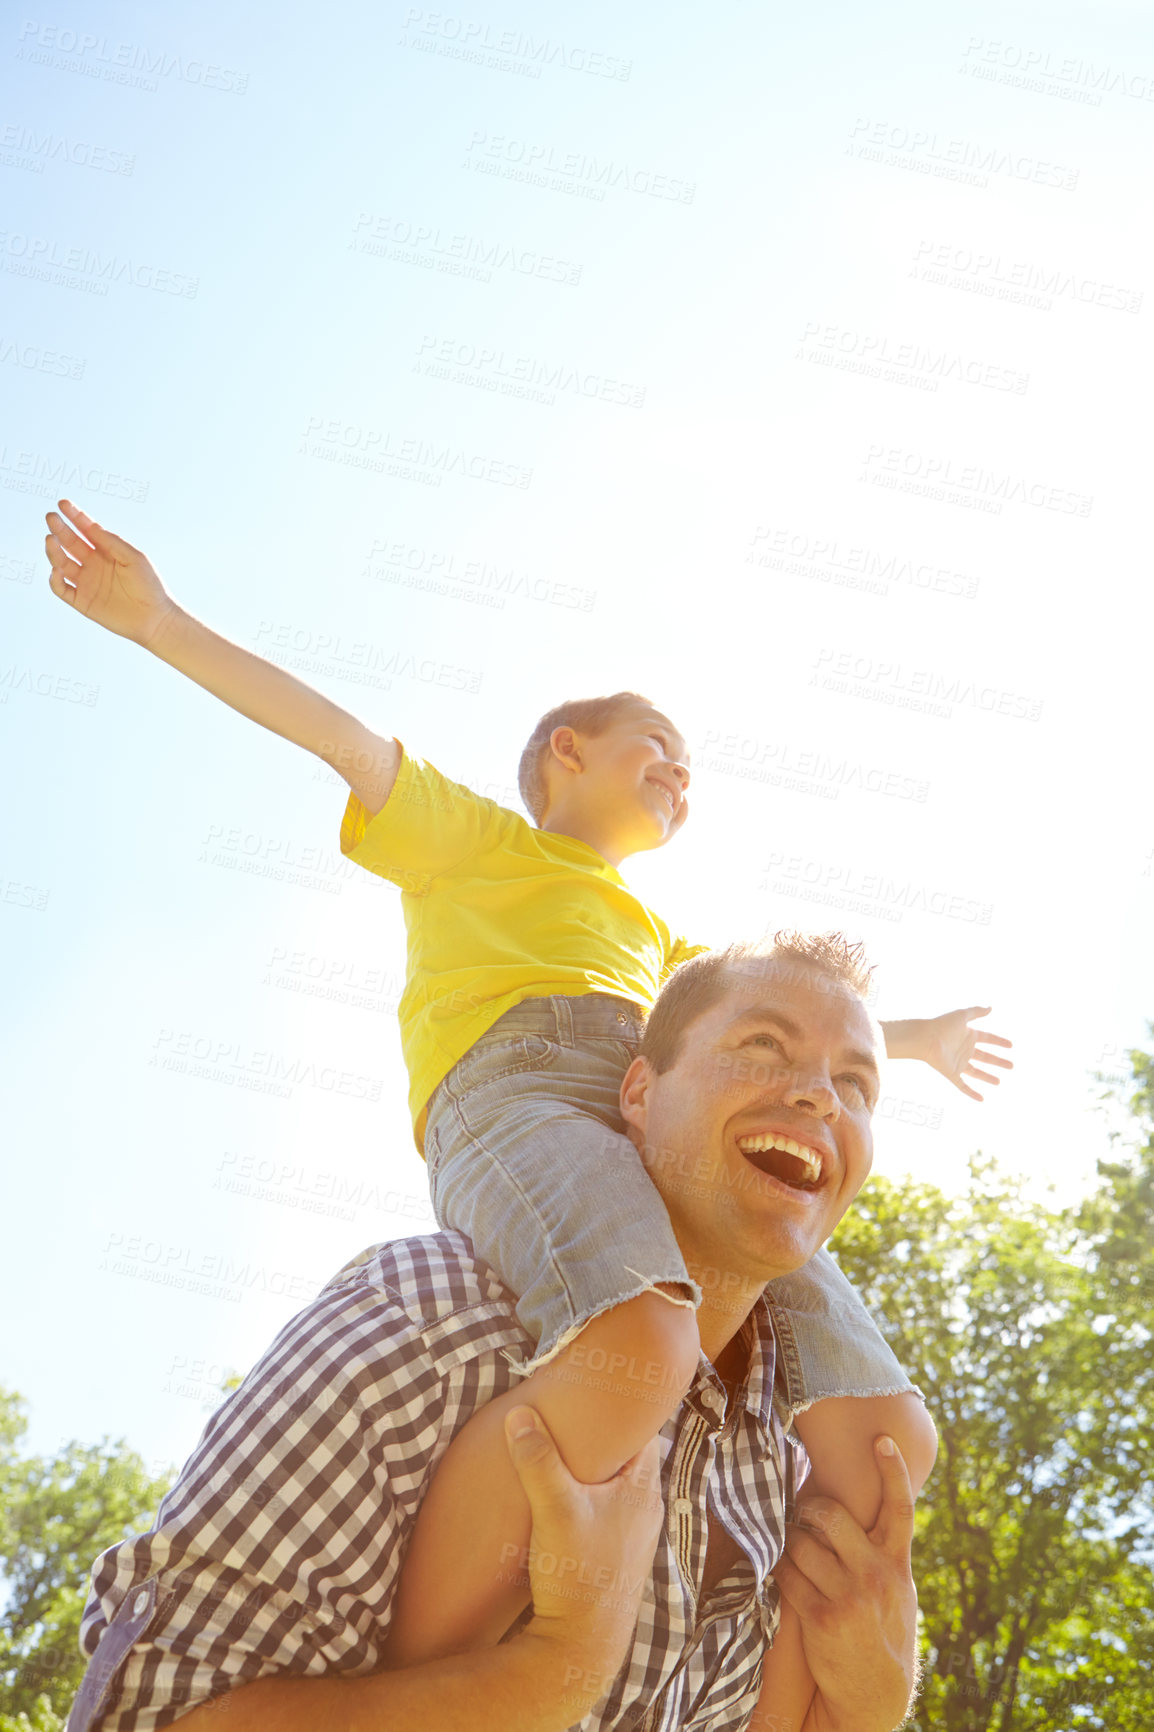 Buy stock photo Cute young boy with his arms outstretched while sitting on his father's shoulders and laughing